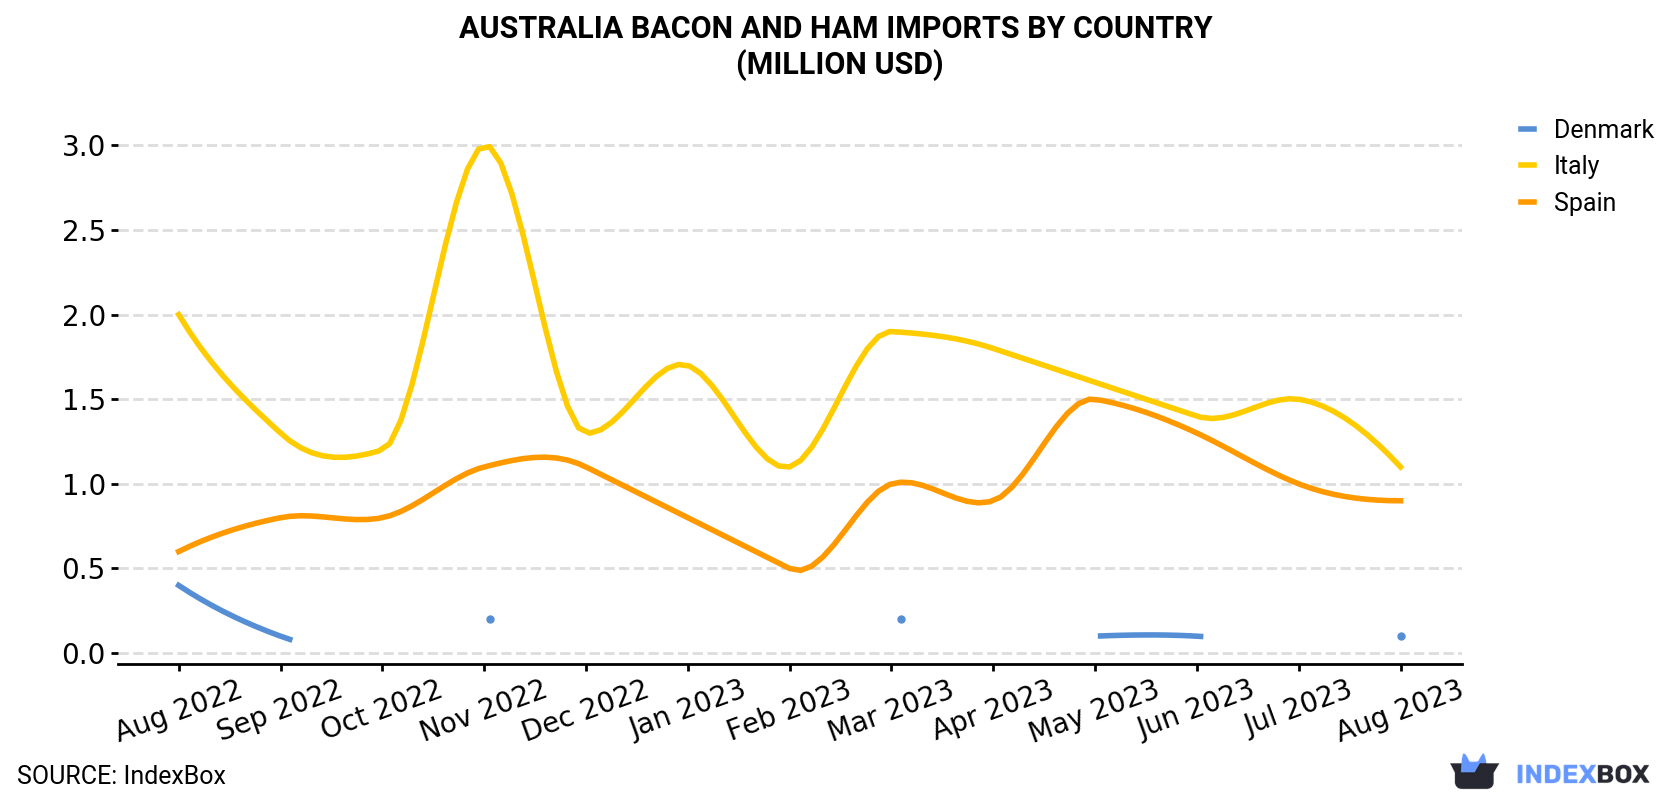 Australia Bacon And Ham Imports By Country (Million USD)